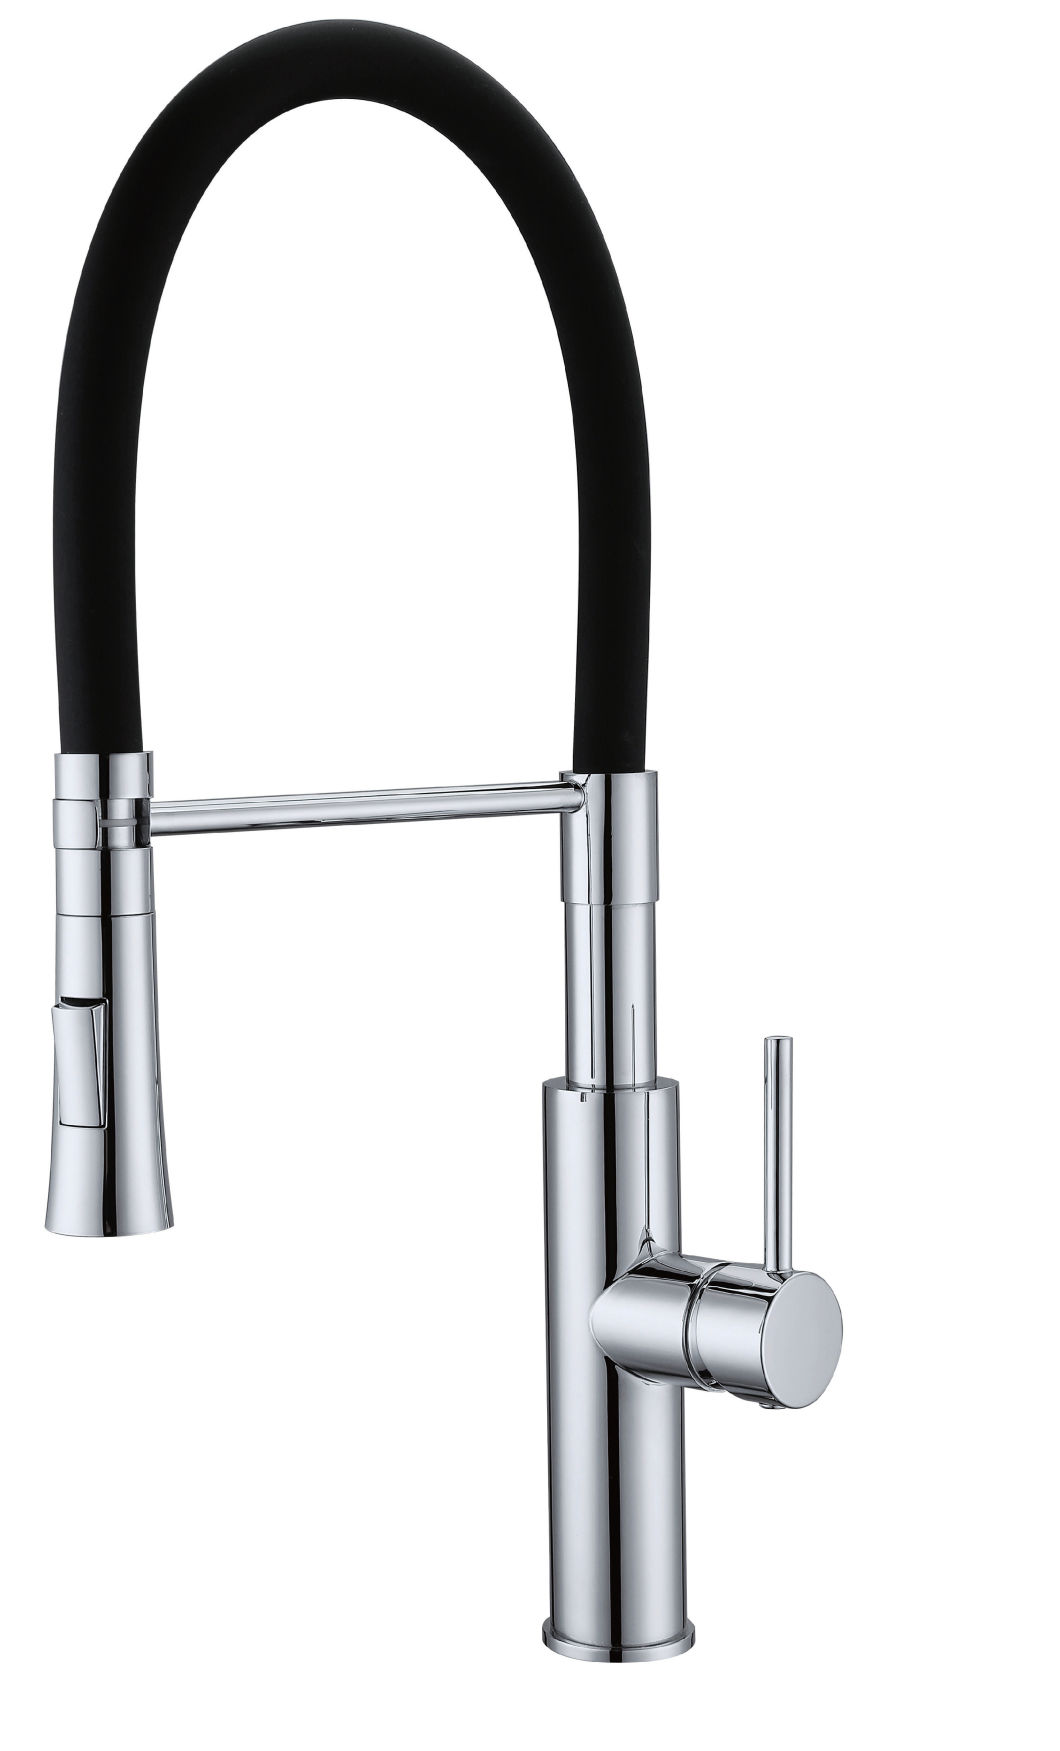 Black Color Pipe Chrome Motion Sense One Handle High Quality Pull Down Kitchen Faucet (821021C)